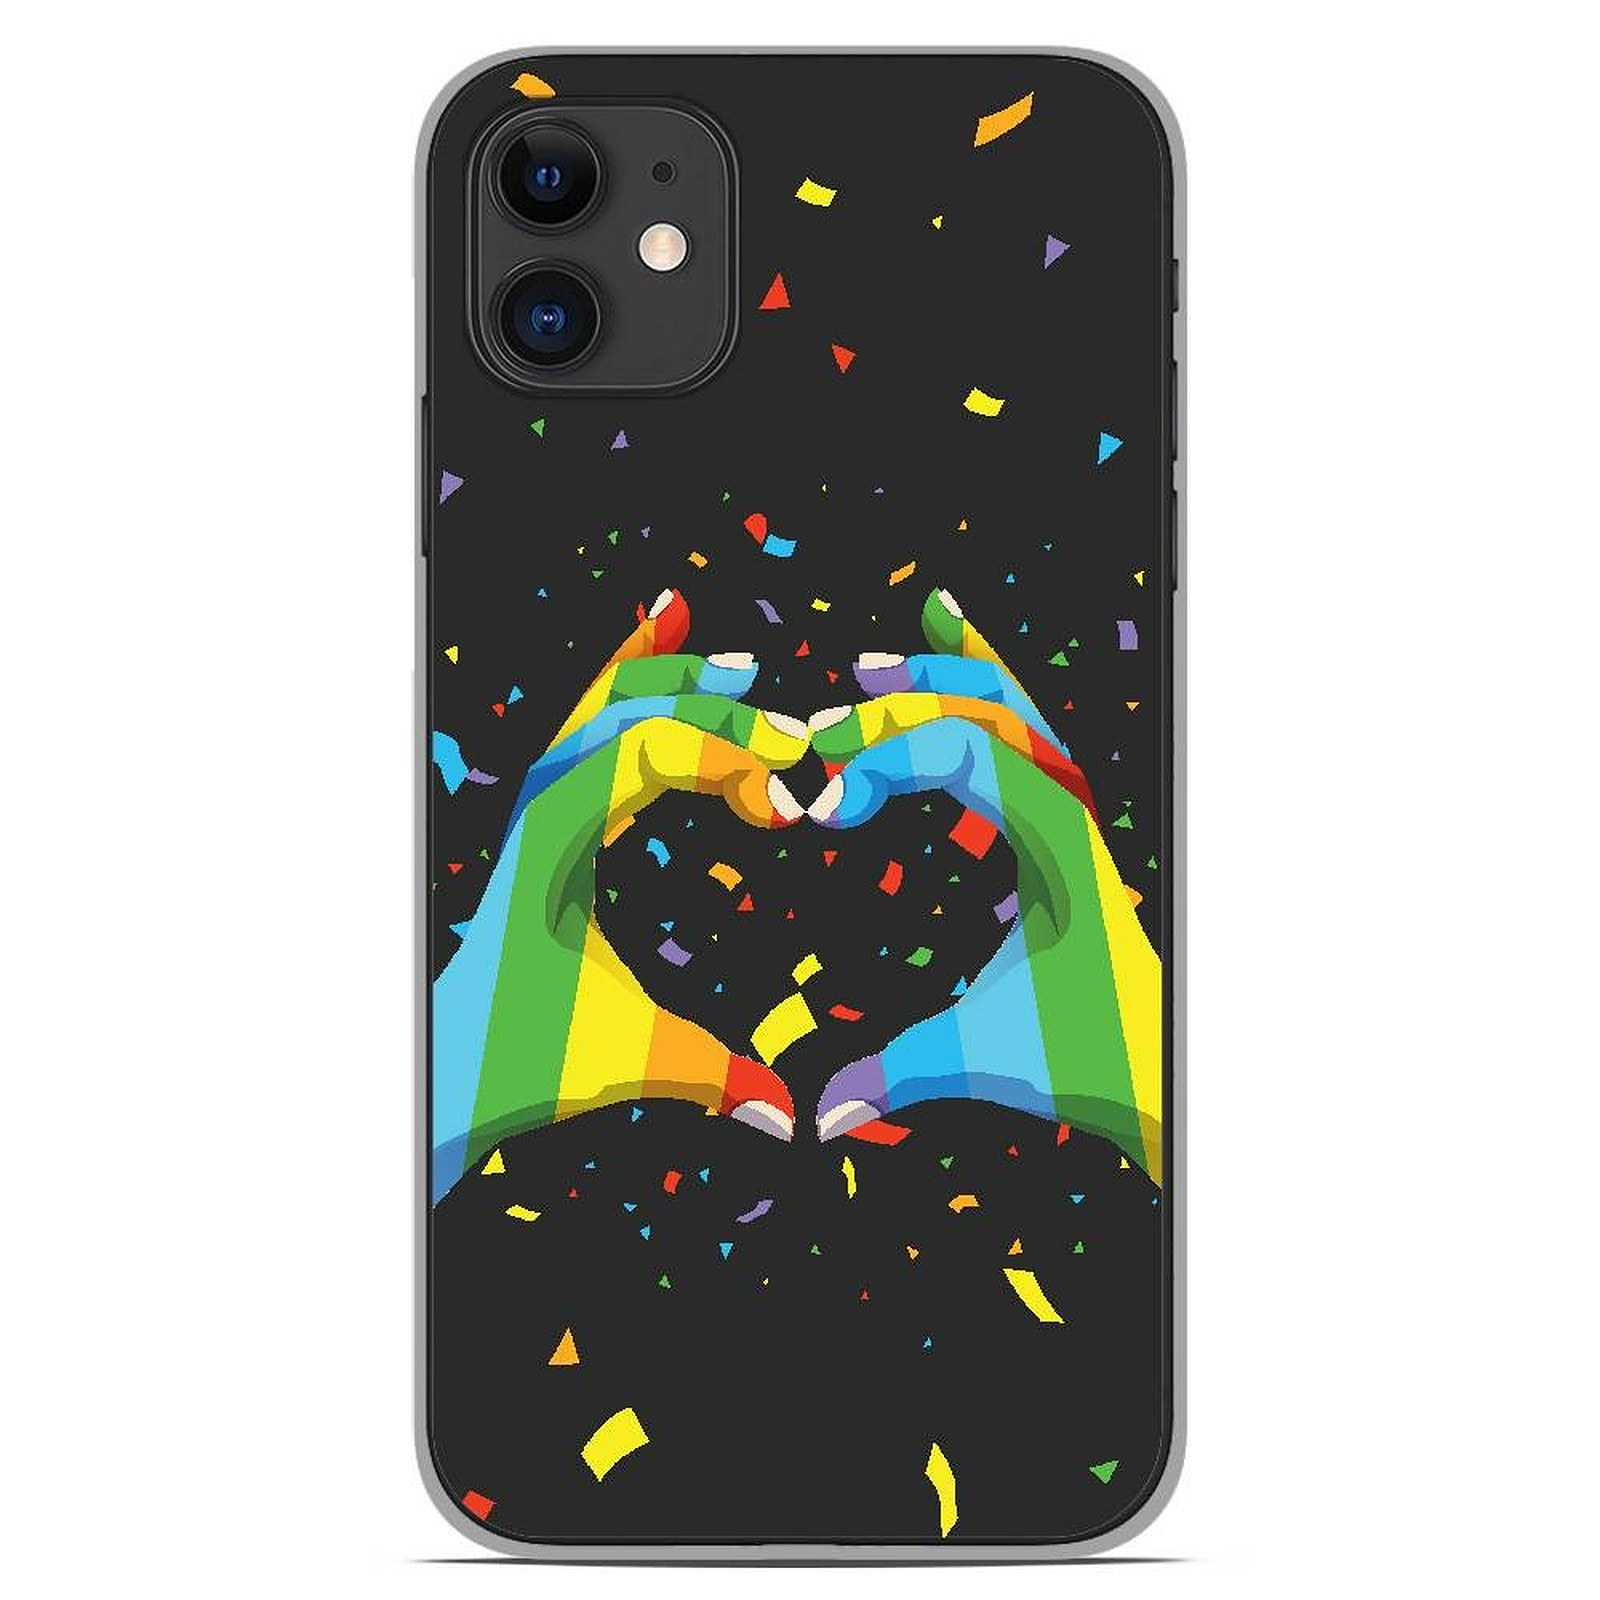 1001 Coques Coque silicone gel Apple iPhone 11 motif LGBT - Coque telephone 1001Coques